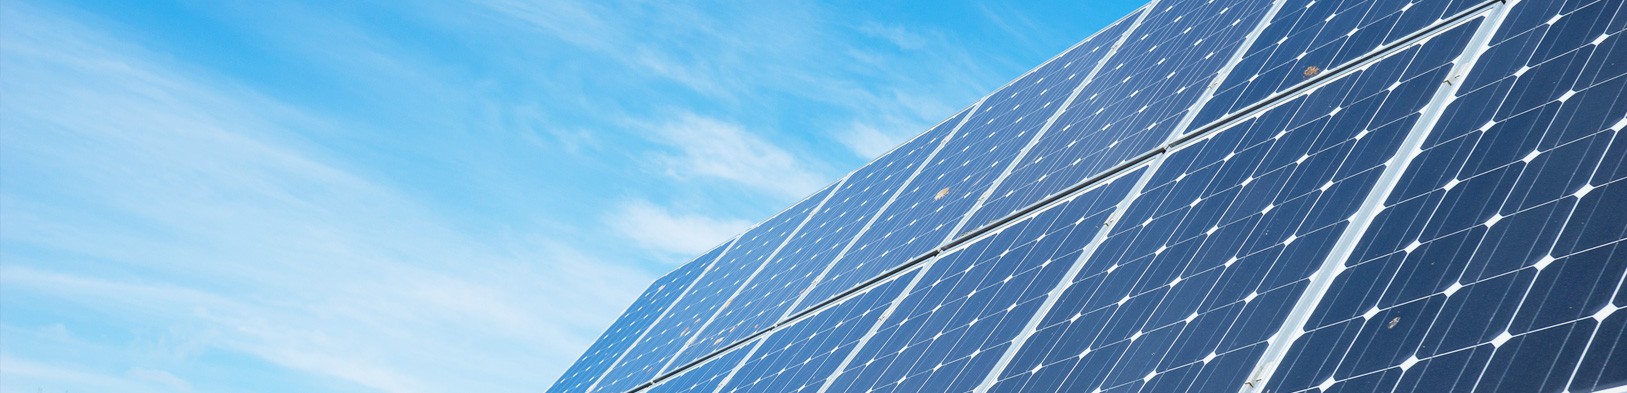 Planning to Setup Solar Roof Plant in Chandigarh? Here’s the Good News